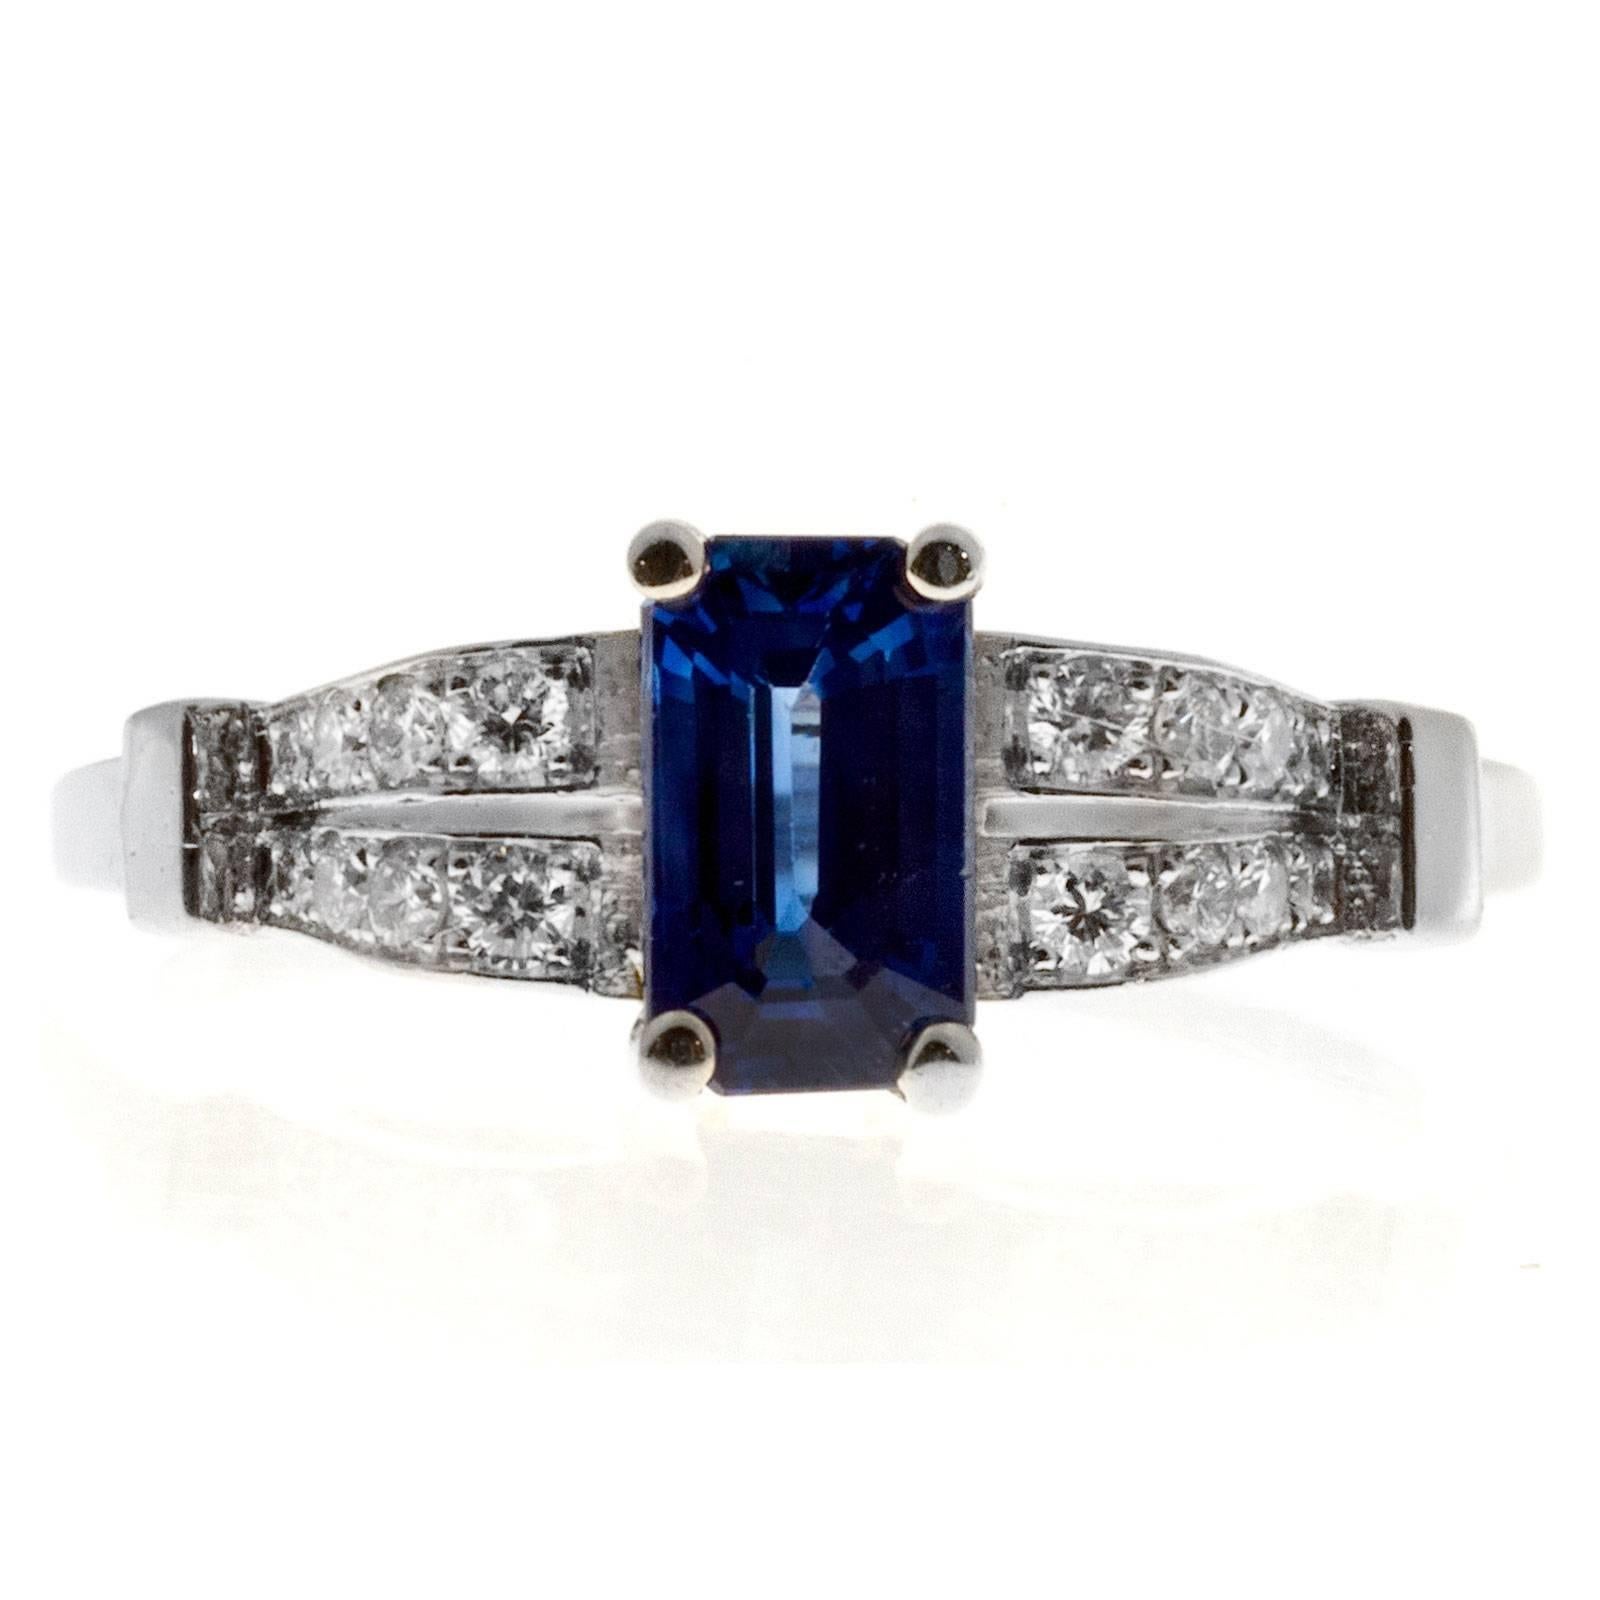 cornflower blue sapphire and diamond platinum with white gold prongs Art Deco engagement ring. Bright blue natural no heat Sapphire, set with 16. The ring is original 1920's Art Deco.

1 AGL certified # GB109112 natural no heat gem blue Sapphire